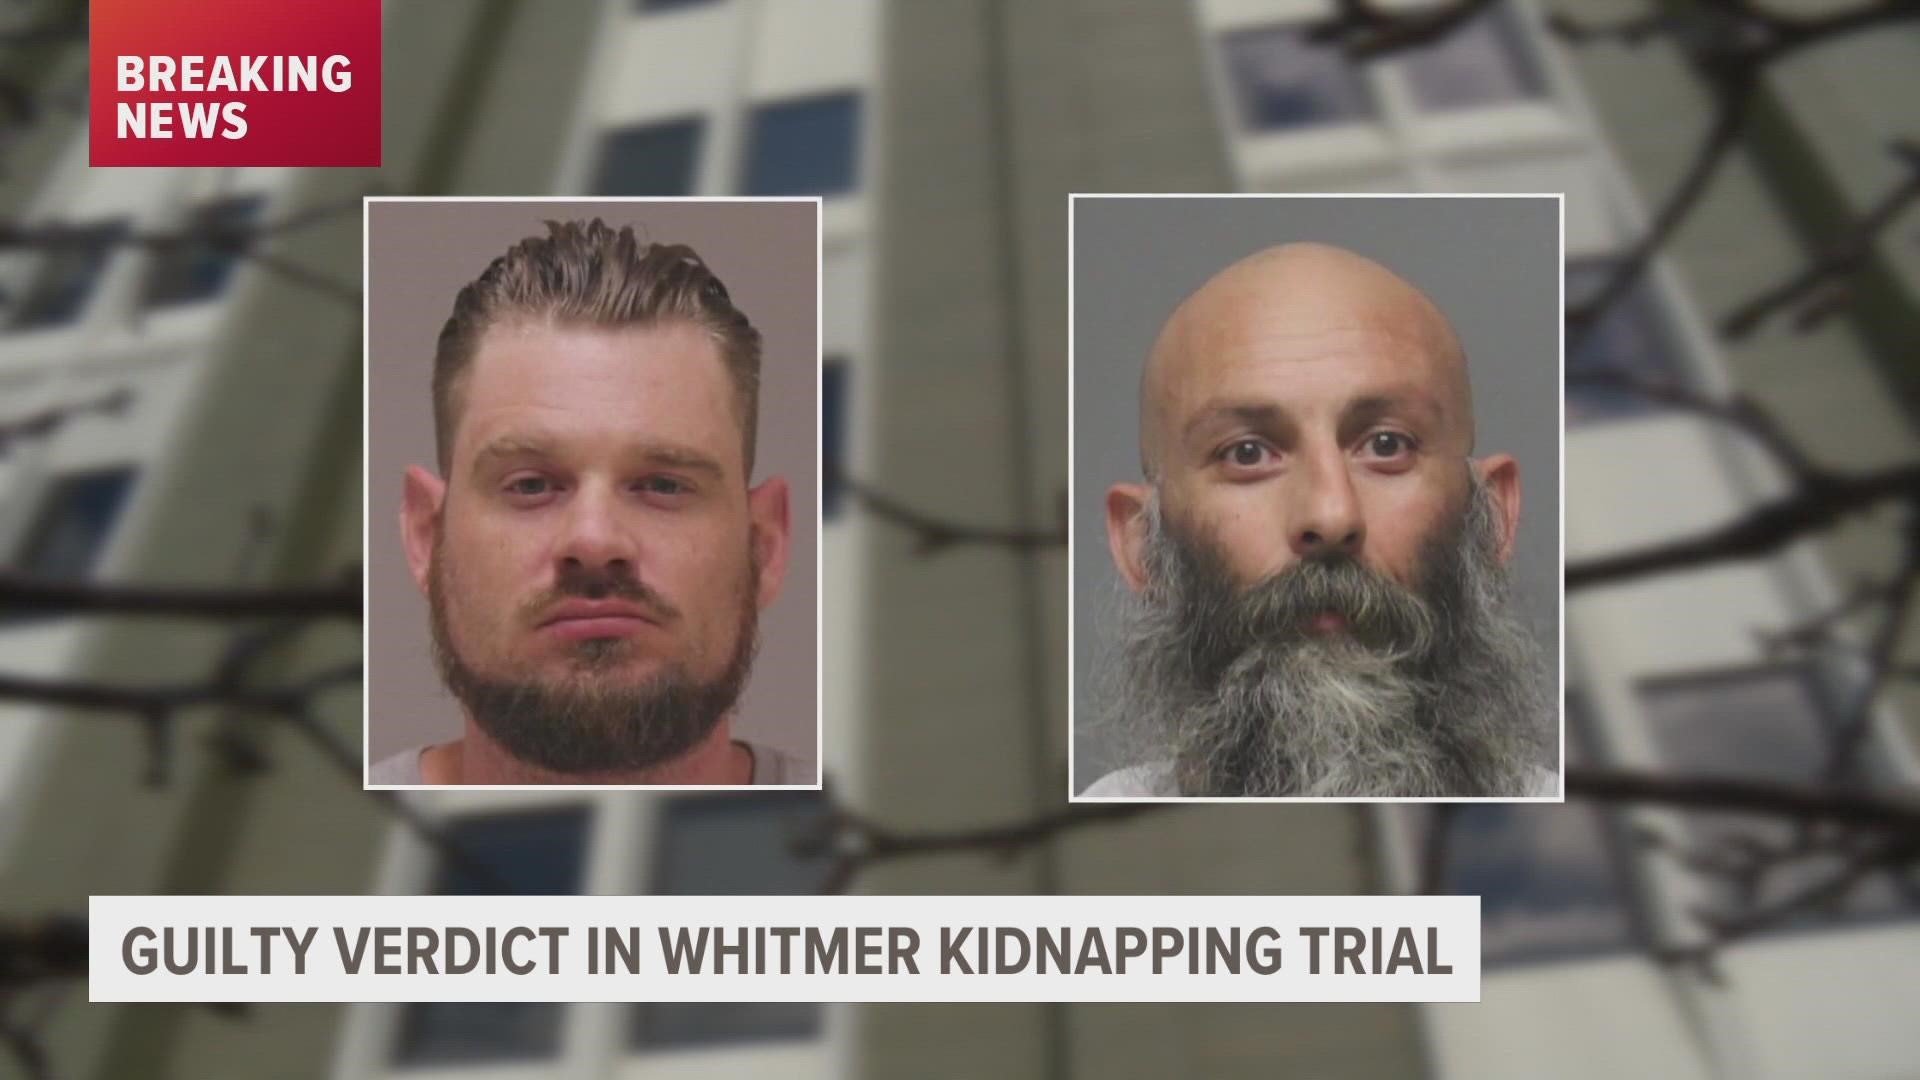 Barry Croft Jr. and Adam Fox were found guilty on all counts in the Governor Whitmer kidnapping trial.